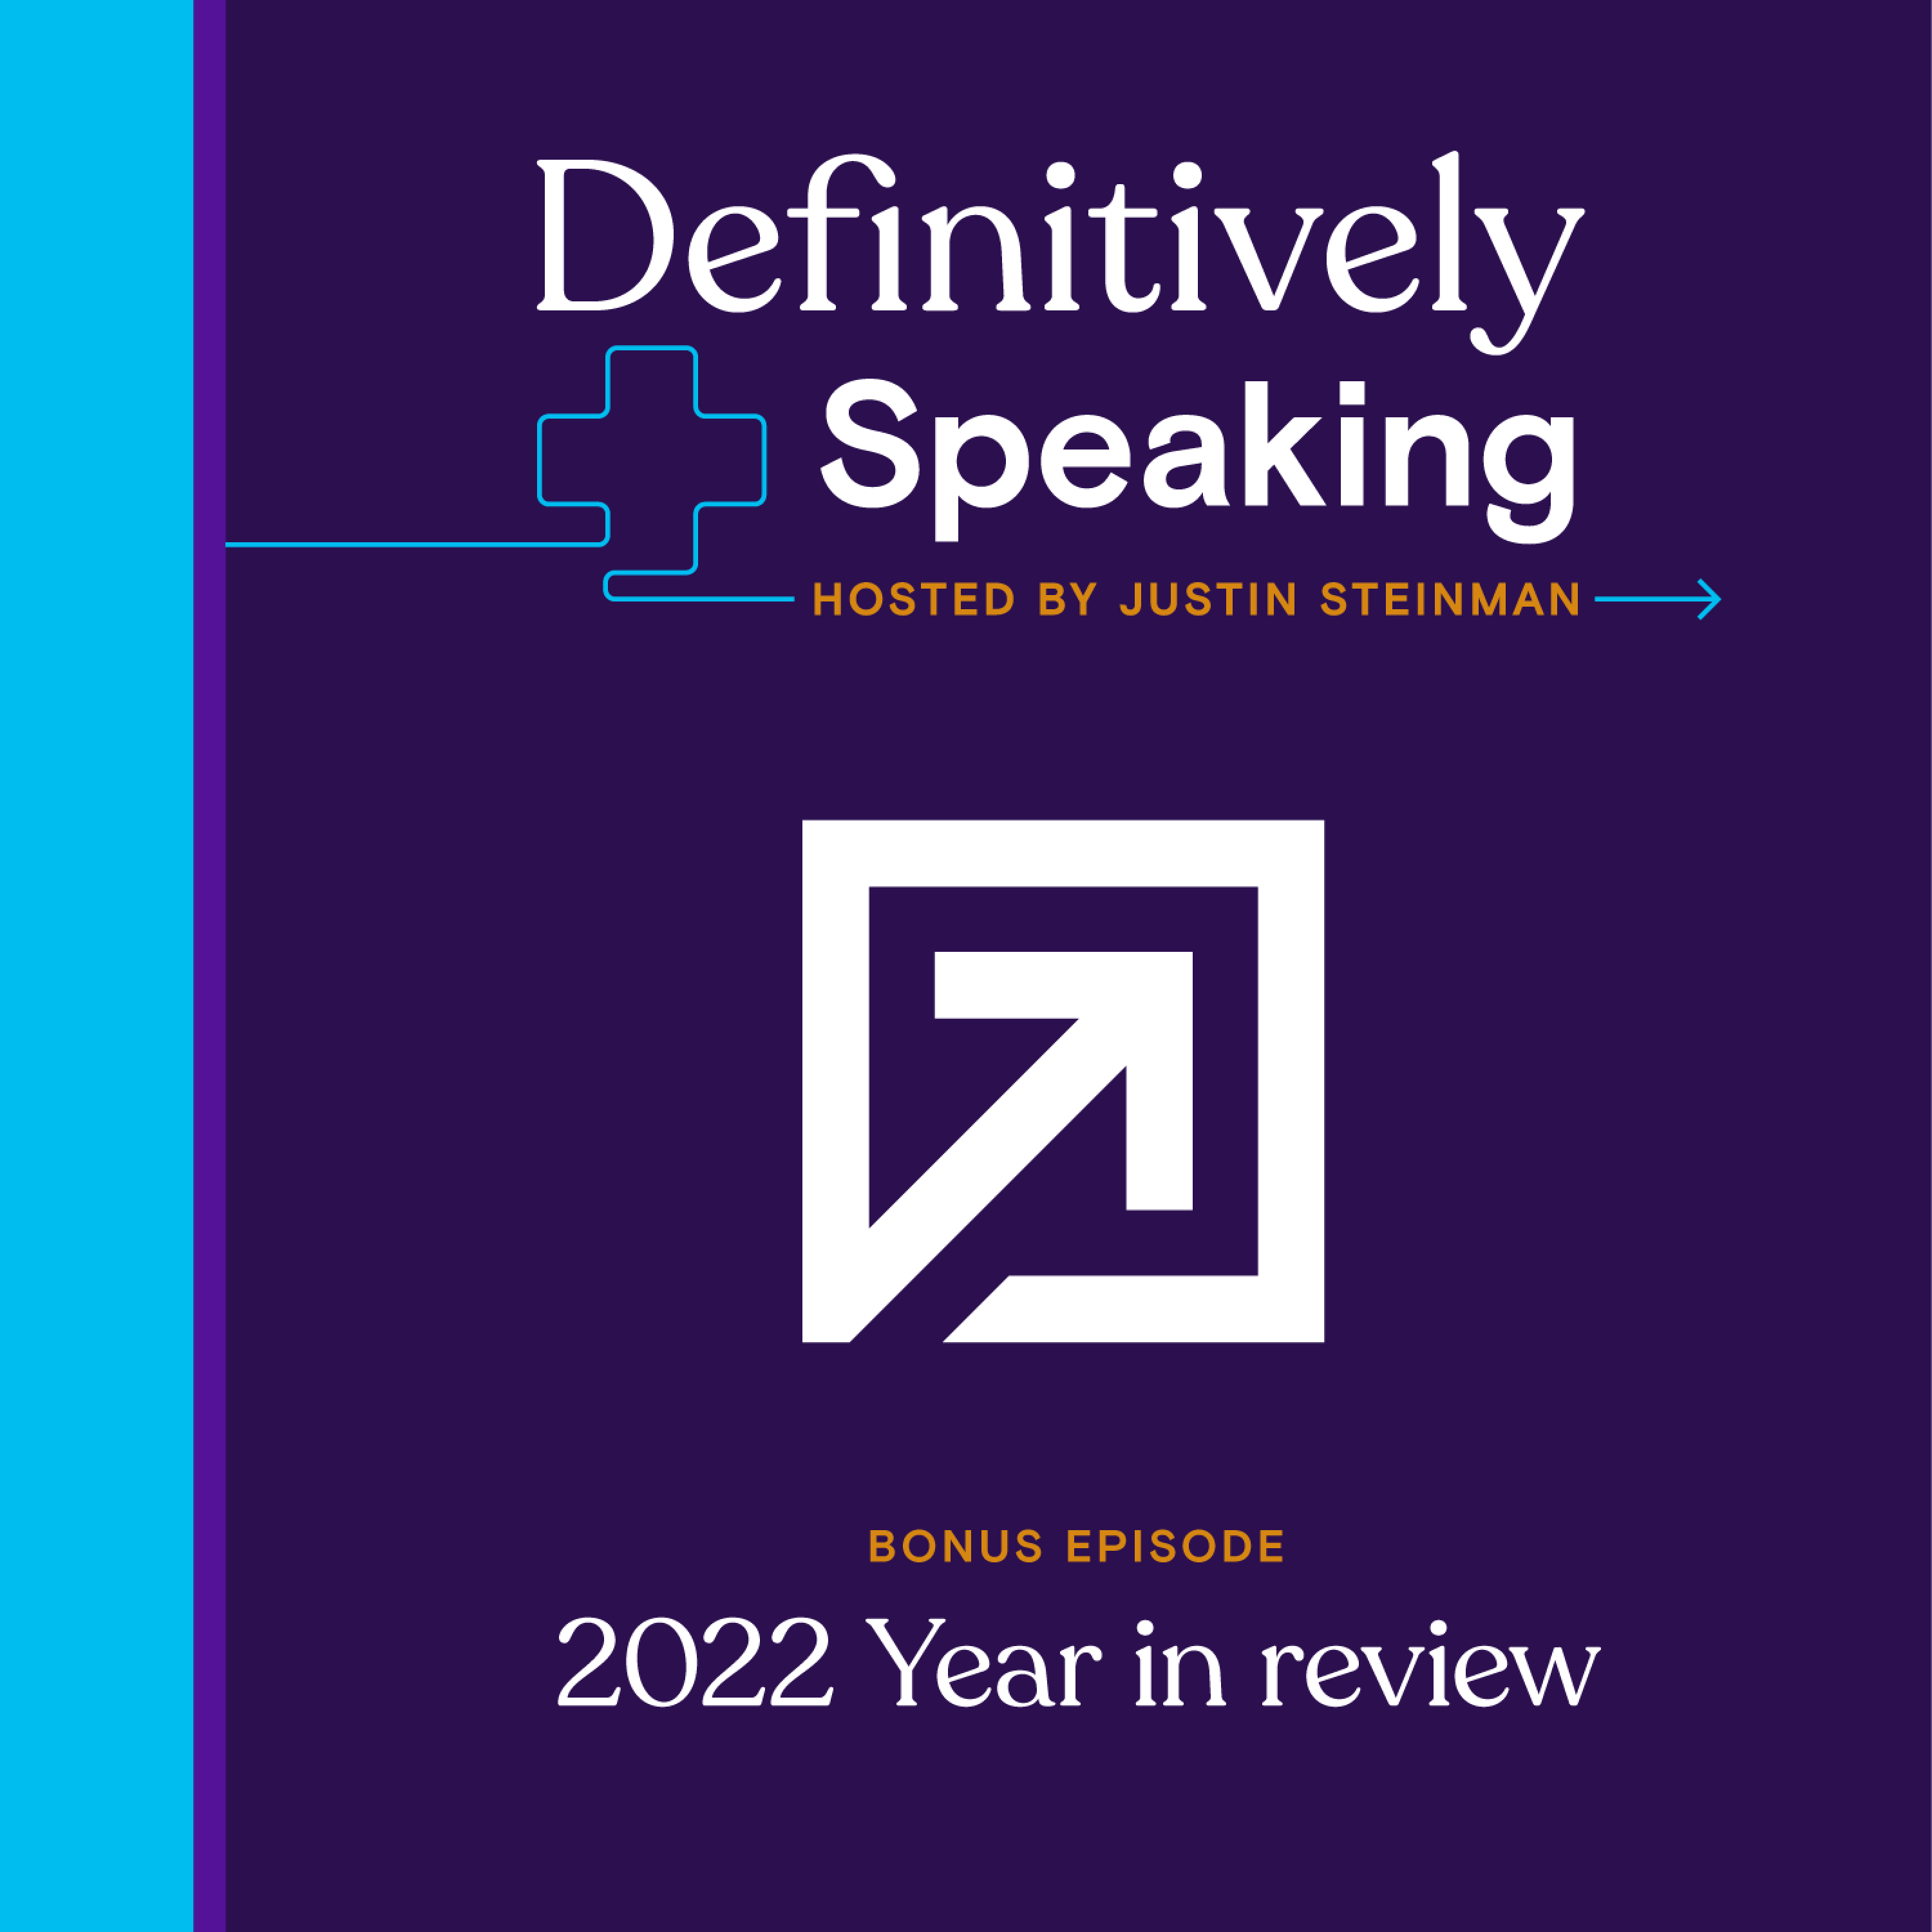 What a Year! — Looking back on 2022 (and at the year ahead) with Justin, Brittany, and Todd